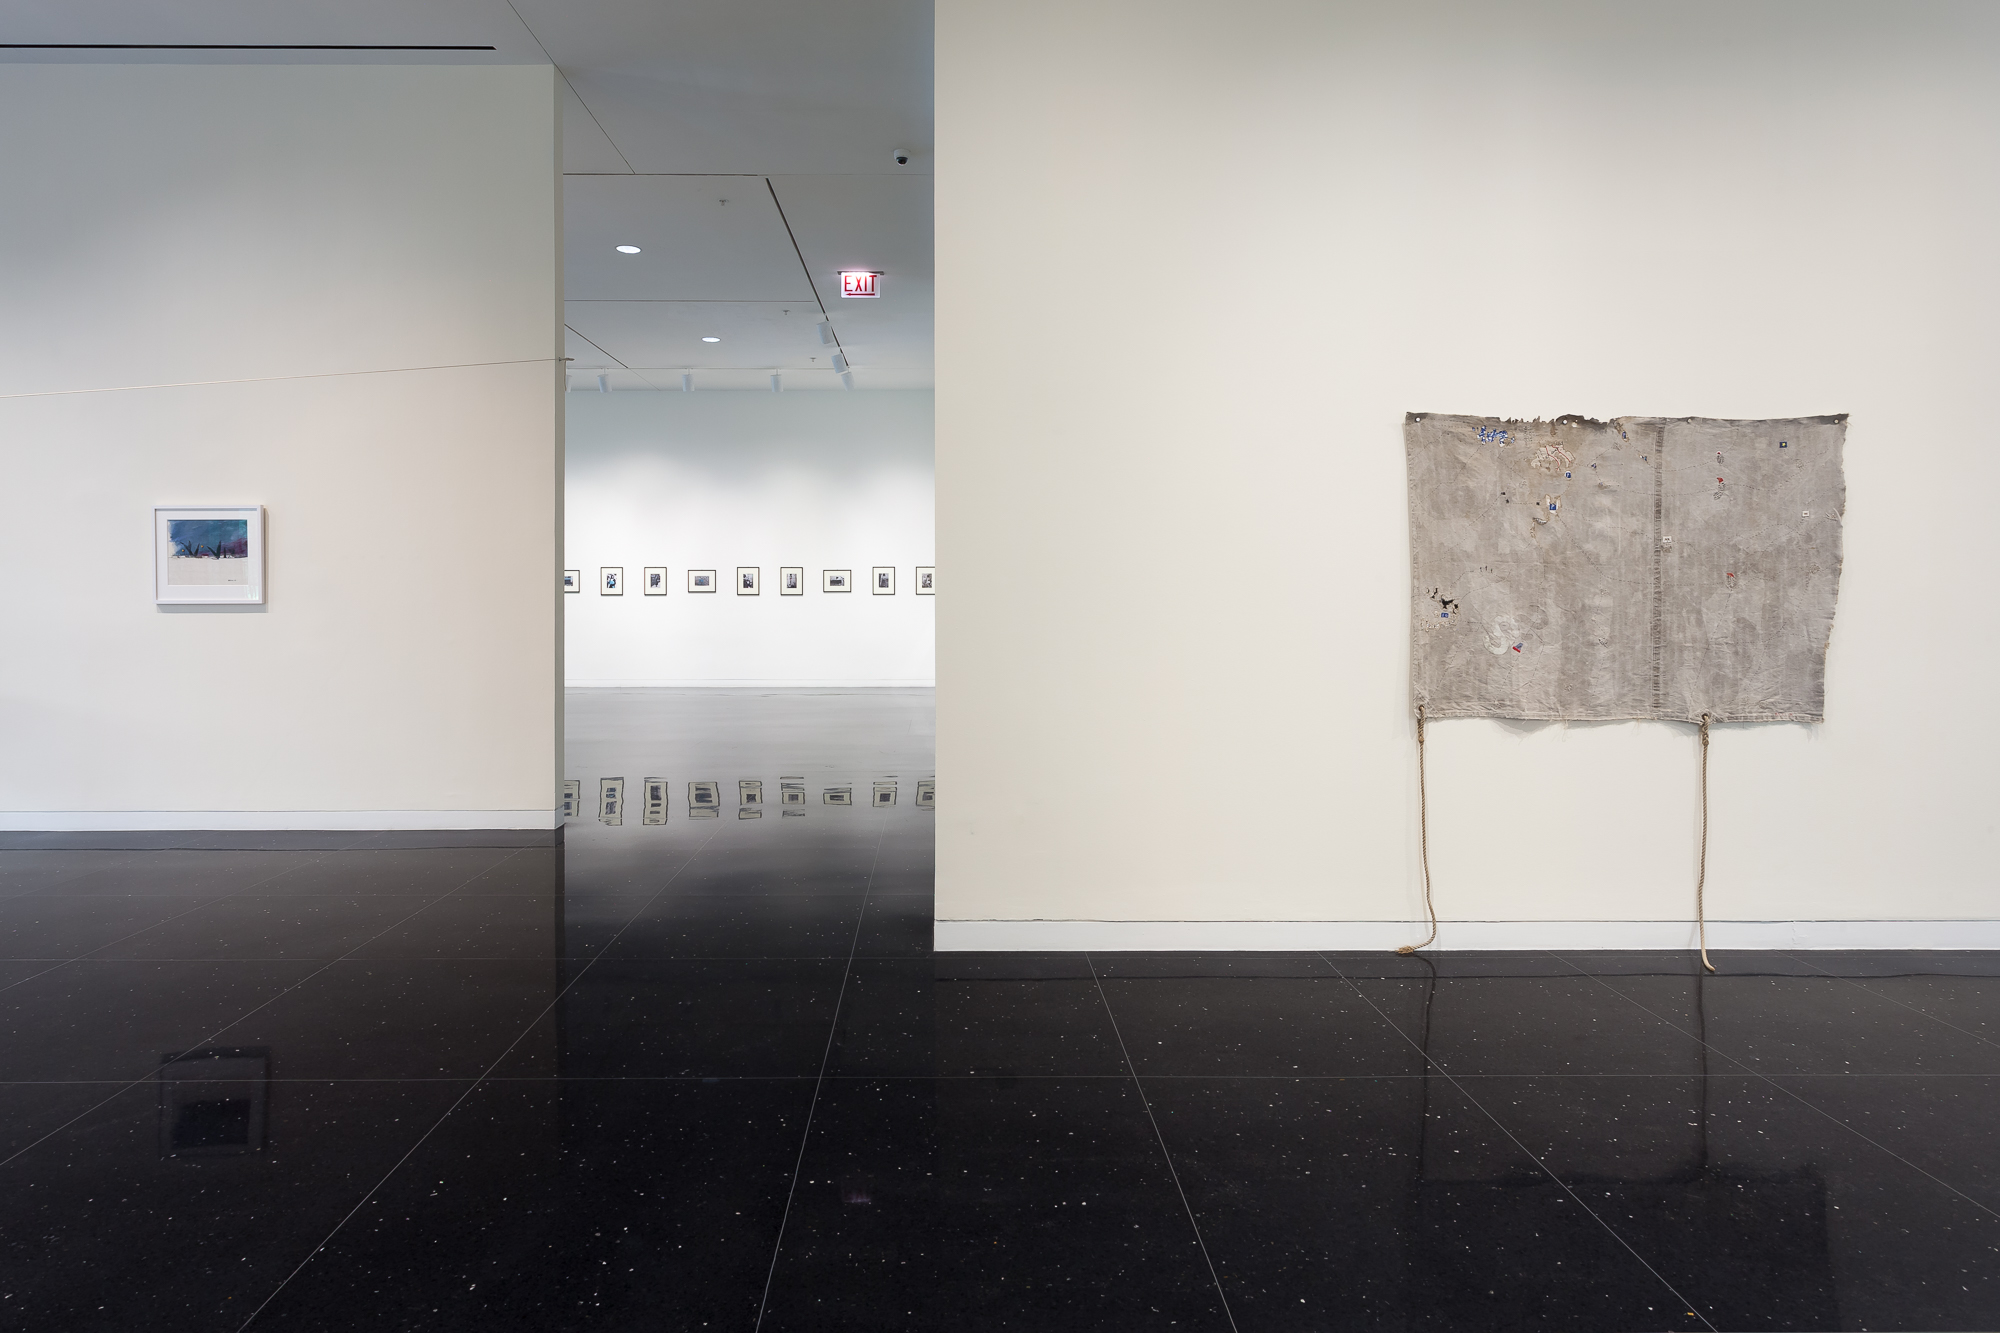 A freestanding white gallery wall with a pale gray, somewhat ragged looking textile hanging from the wall. On a far wall, a line of small, square, framed images hang in a horizontal line on the wall.